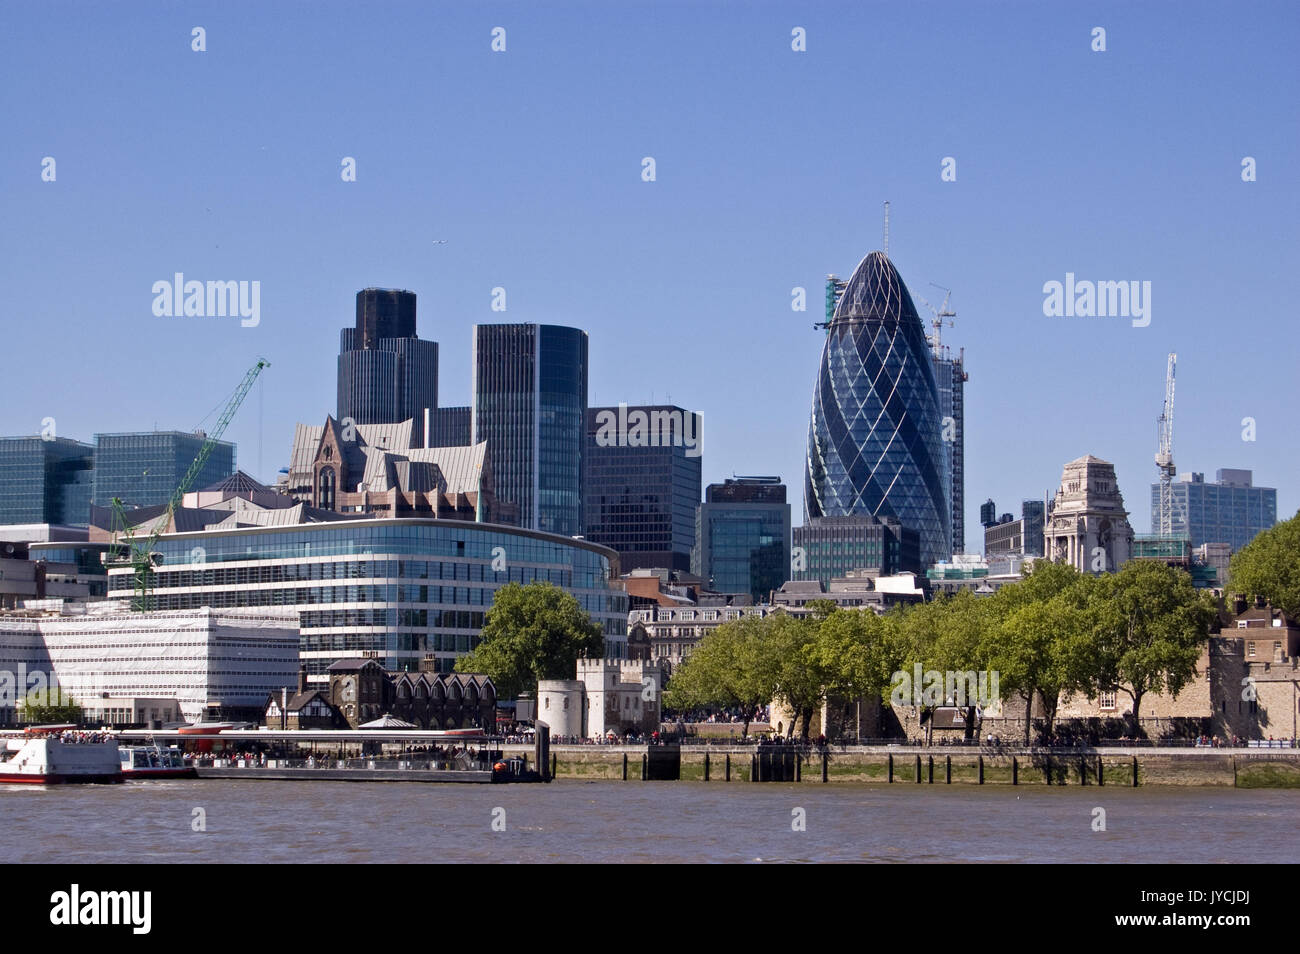 View across the River Thames looking towards the City of London with famour skyscrapers including Tower 42 and The Gherkin. The historic walls of the  Stock Photo